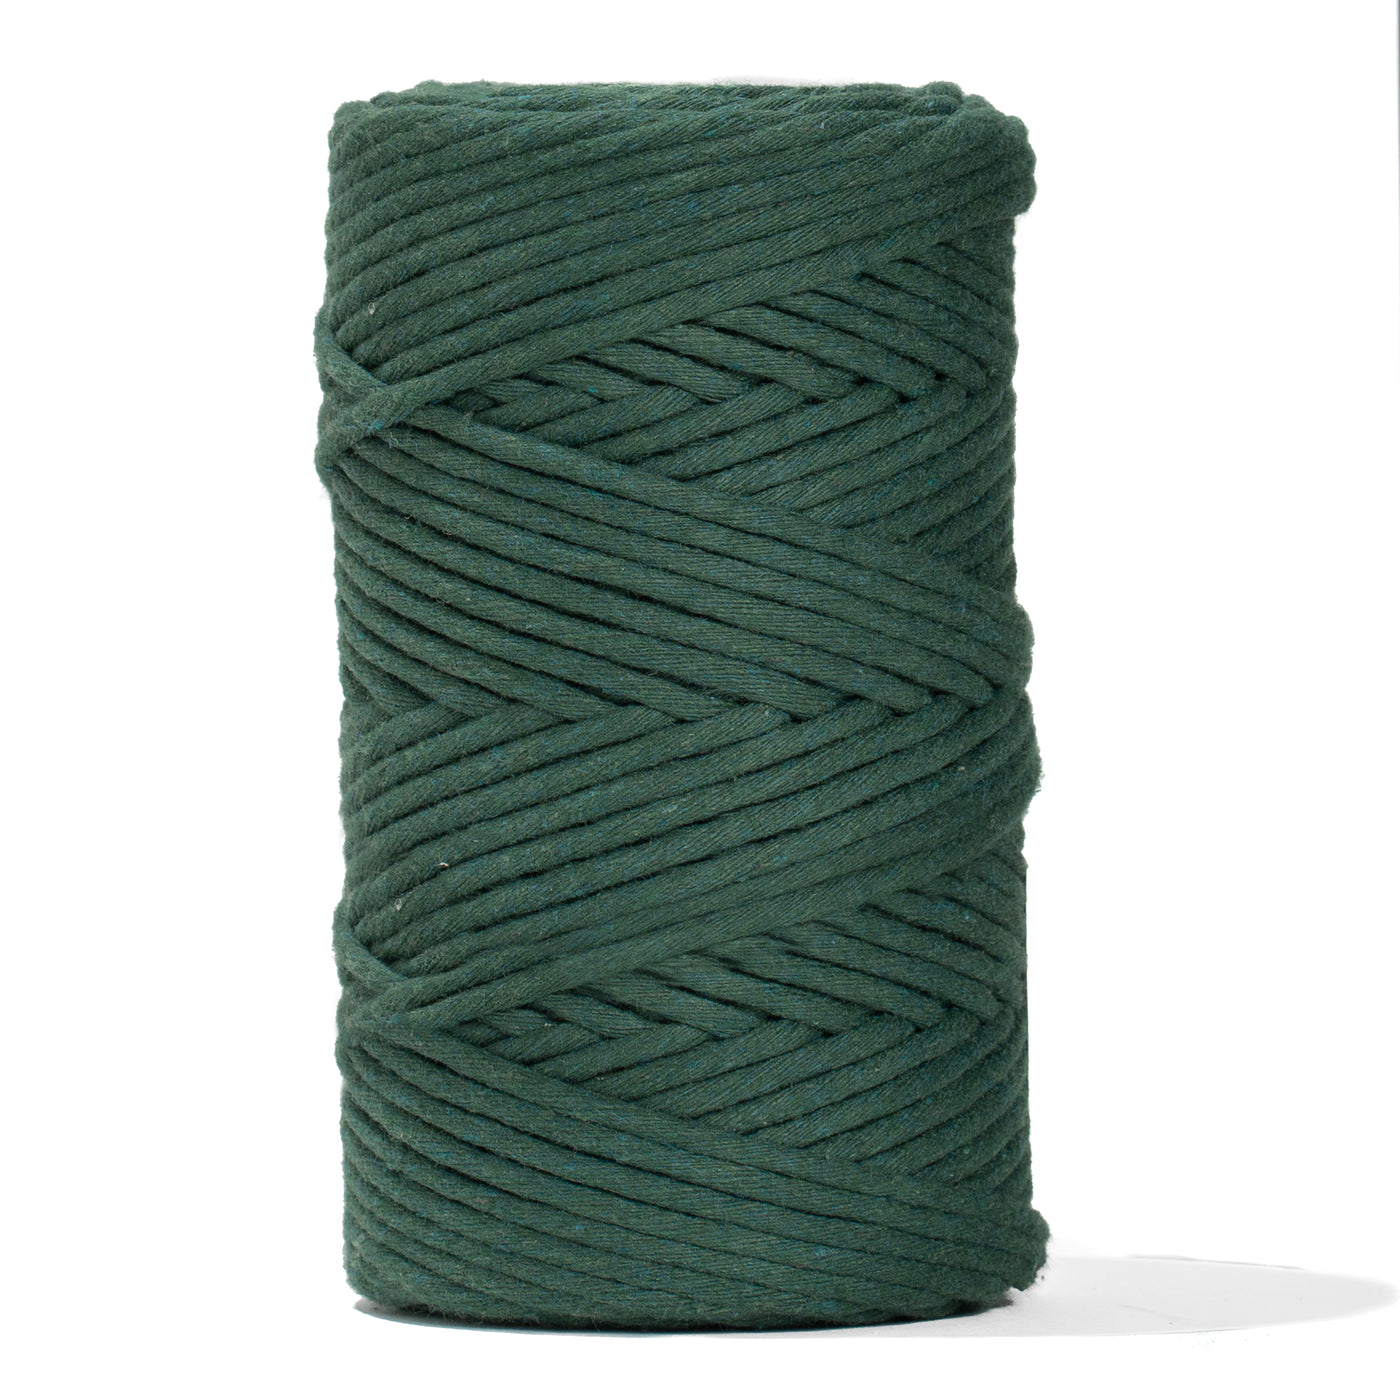 GANXXET MACRAME Cotton Cord 3 Mm 3 Strands Recycled Cotton Rope